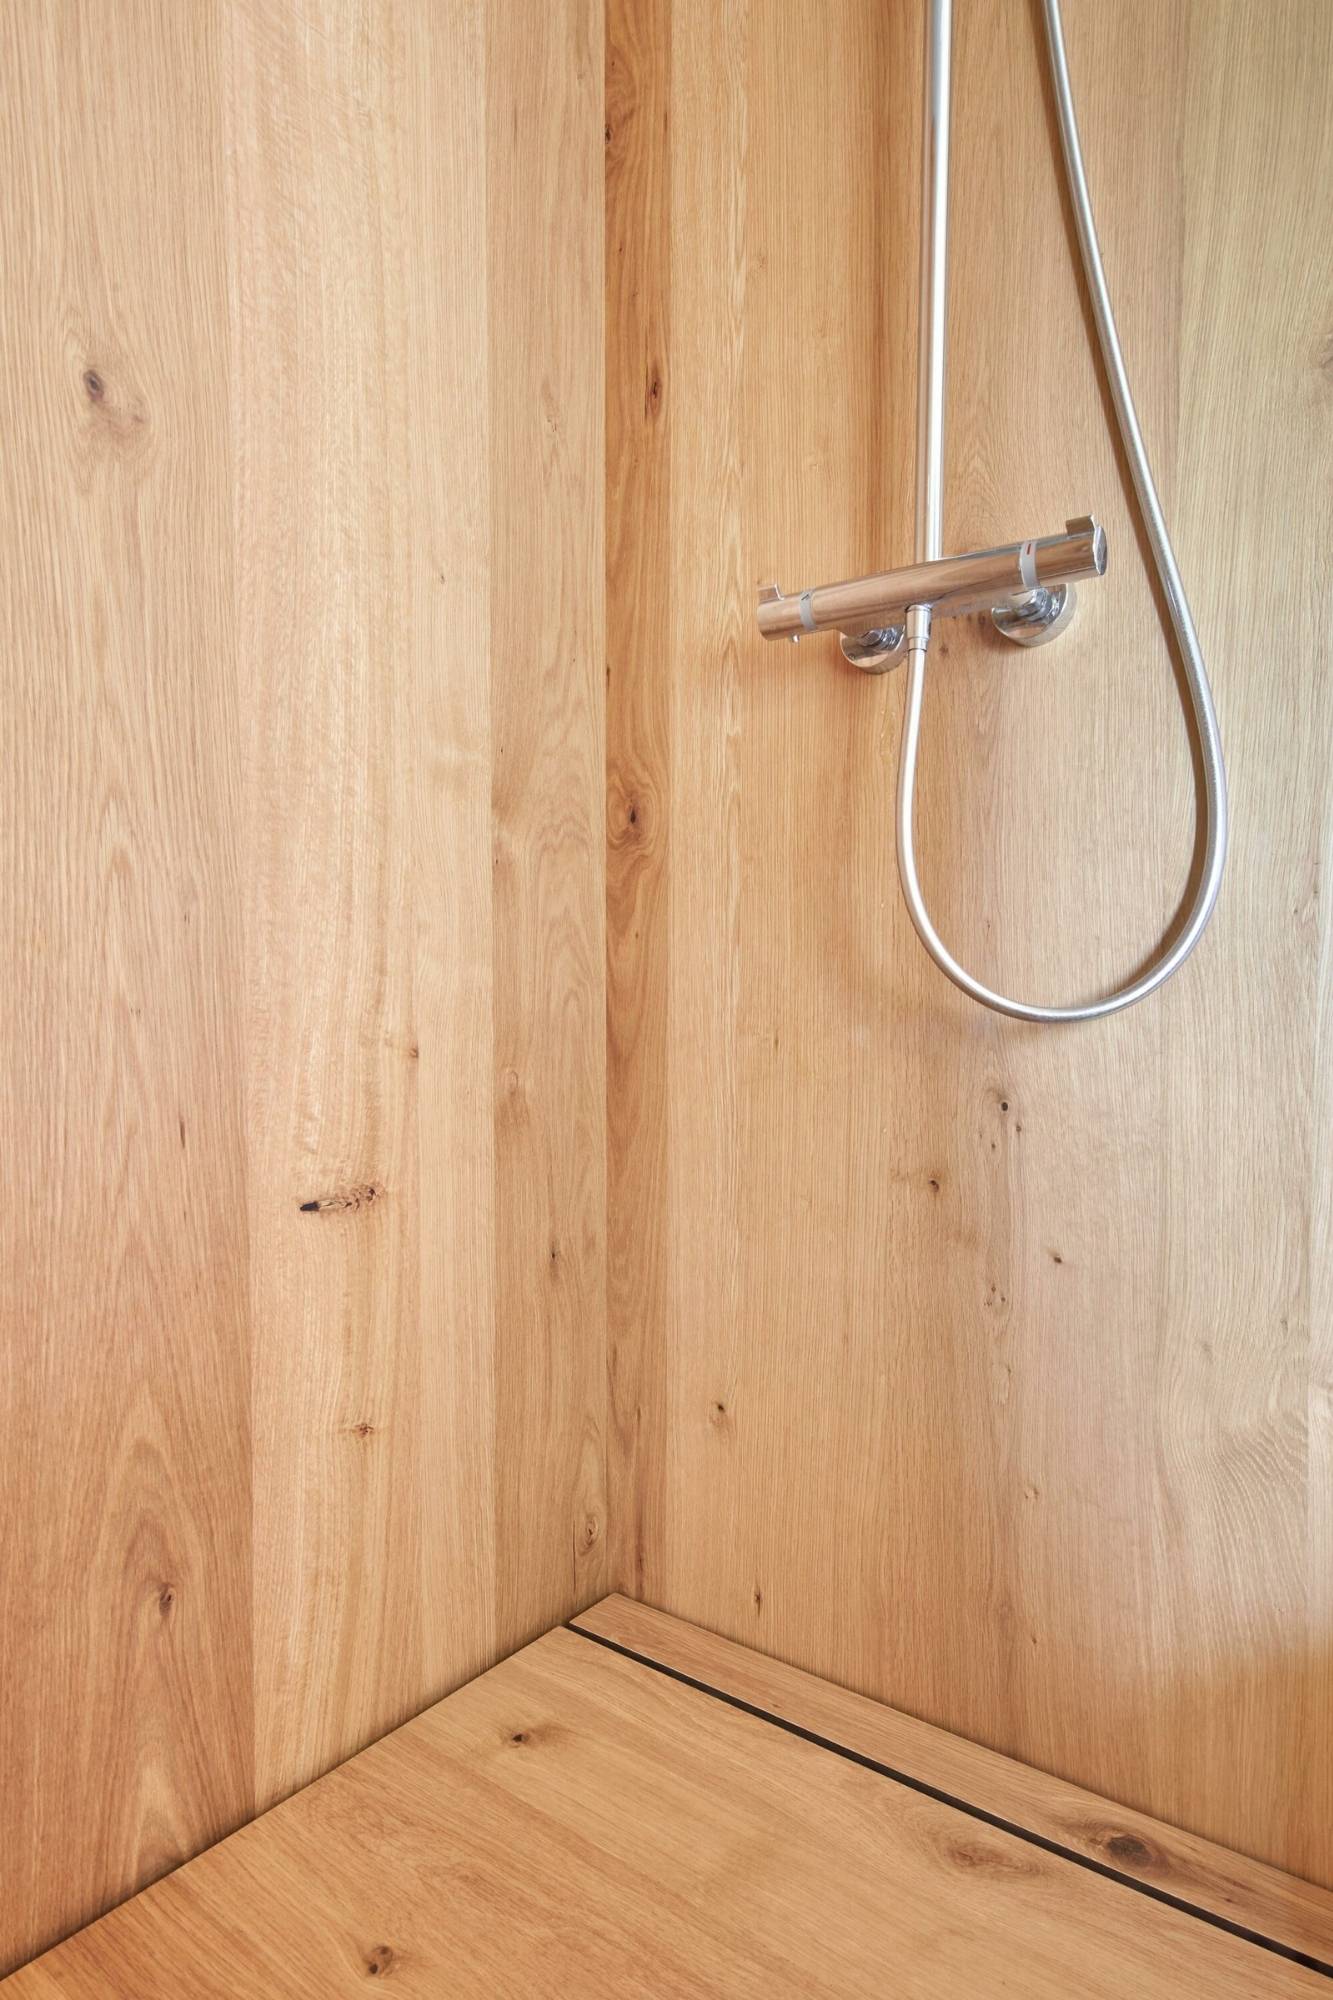 wood products, Water-Resistant Wood Coverings on Floors, Bathrooms, and Shower Stalls